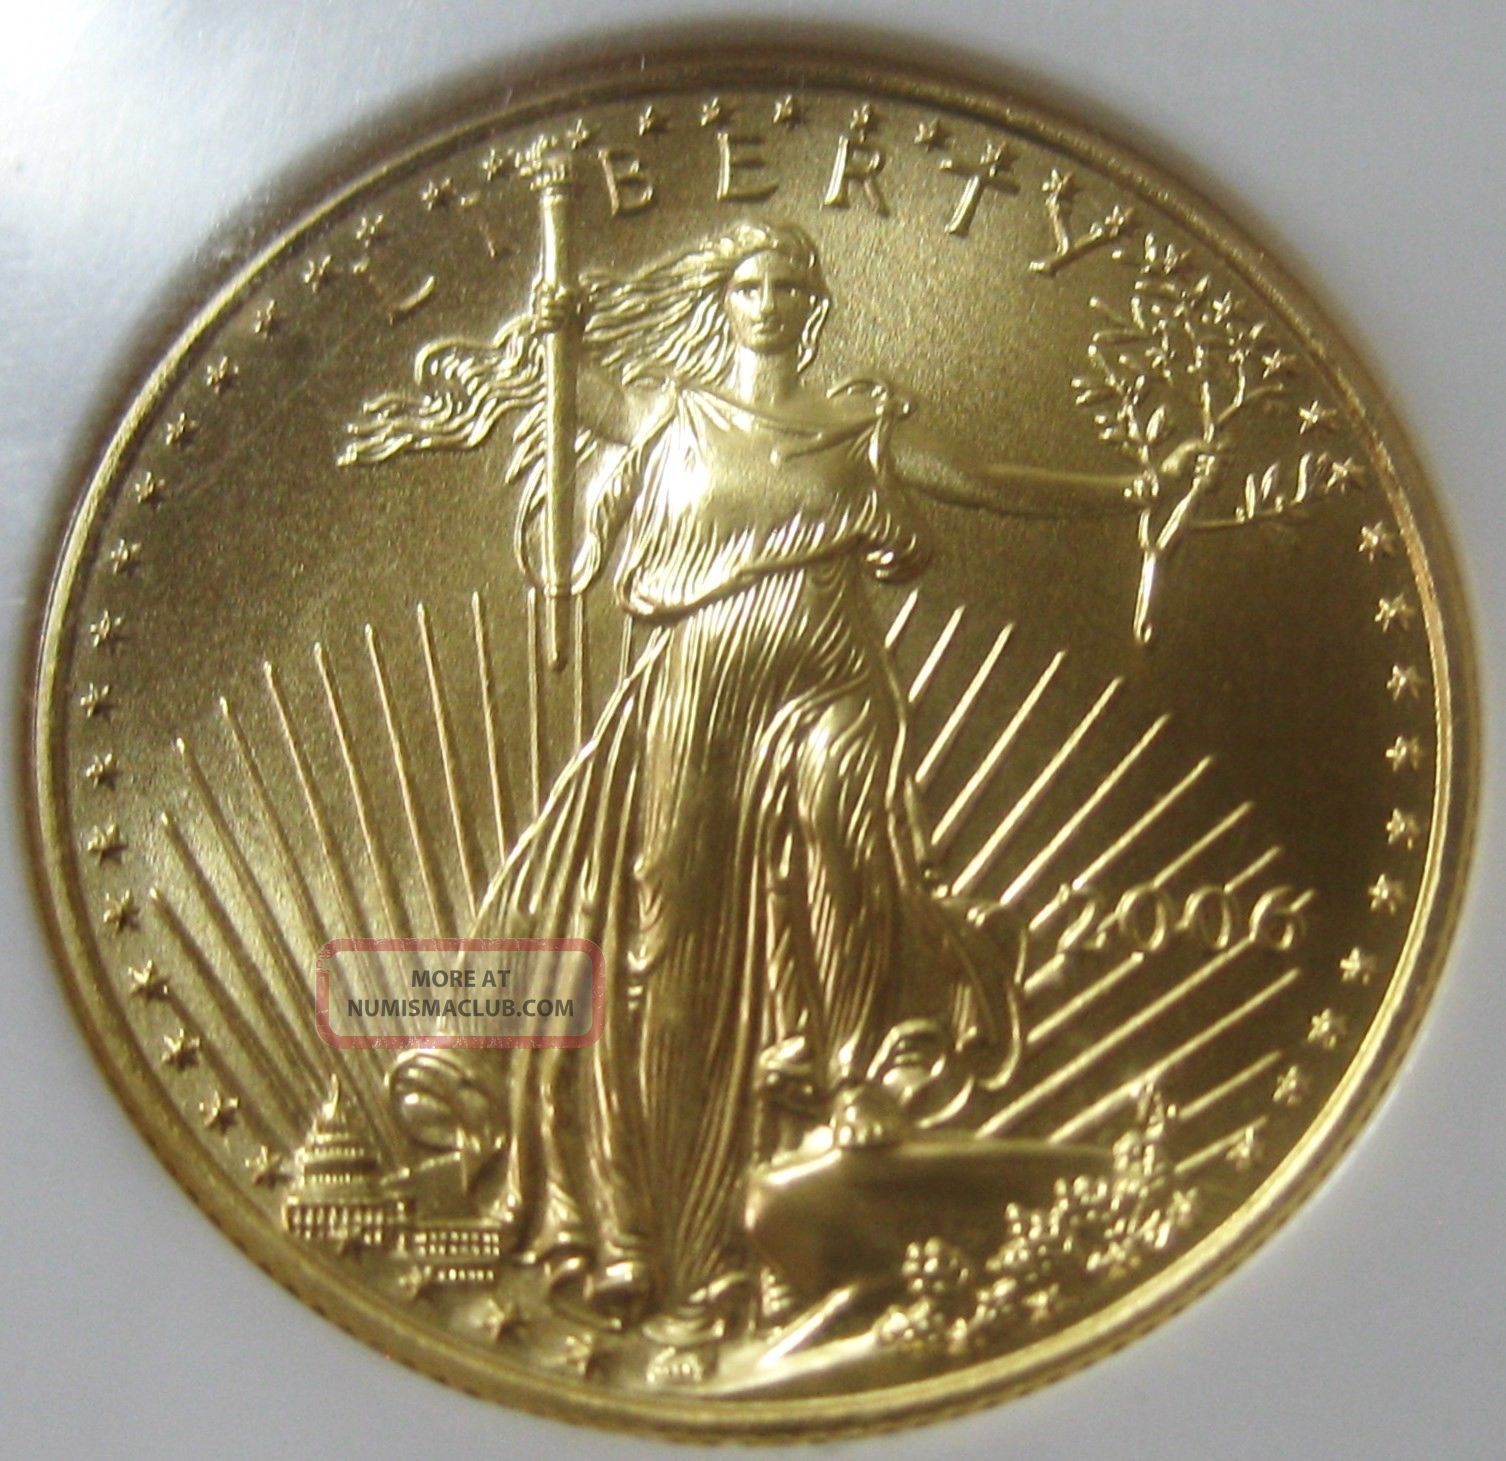 2006 $25 1/2oz Gold American Eagle Ngc Ms70 Certified Coin